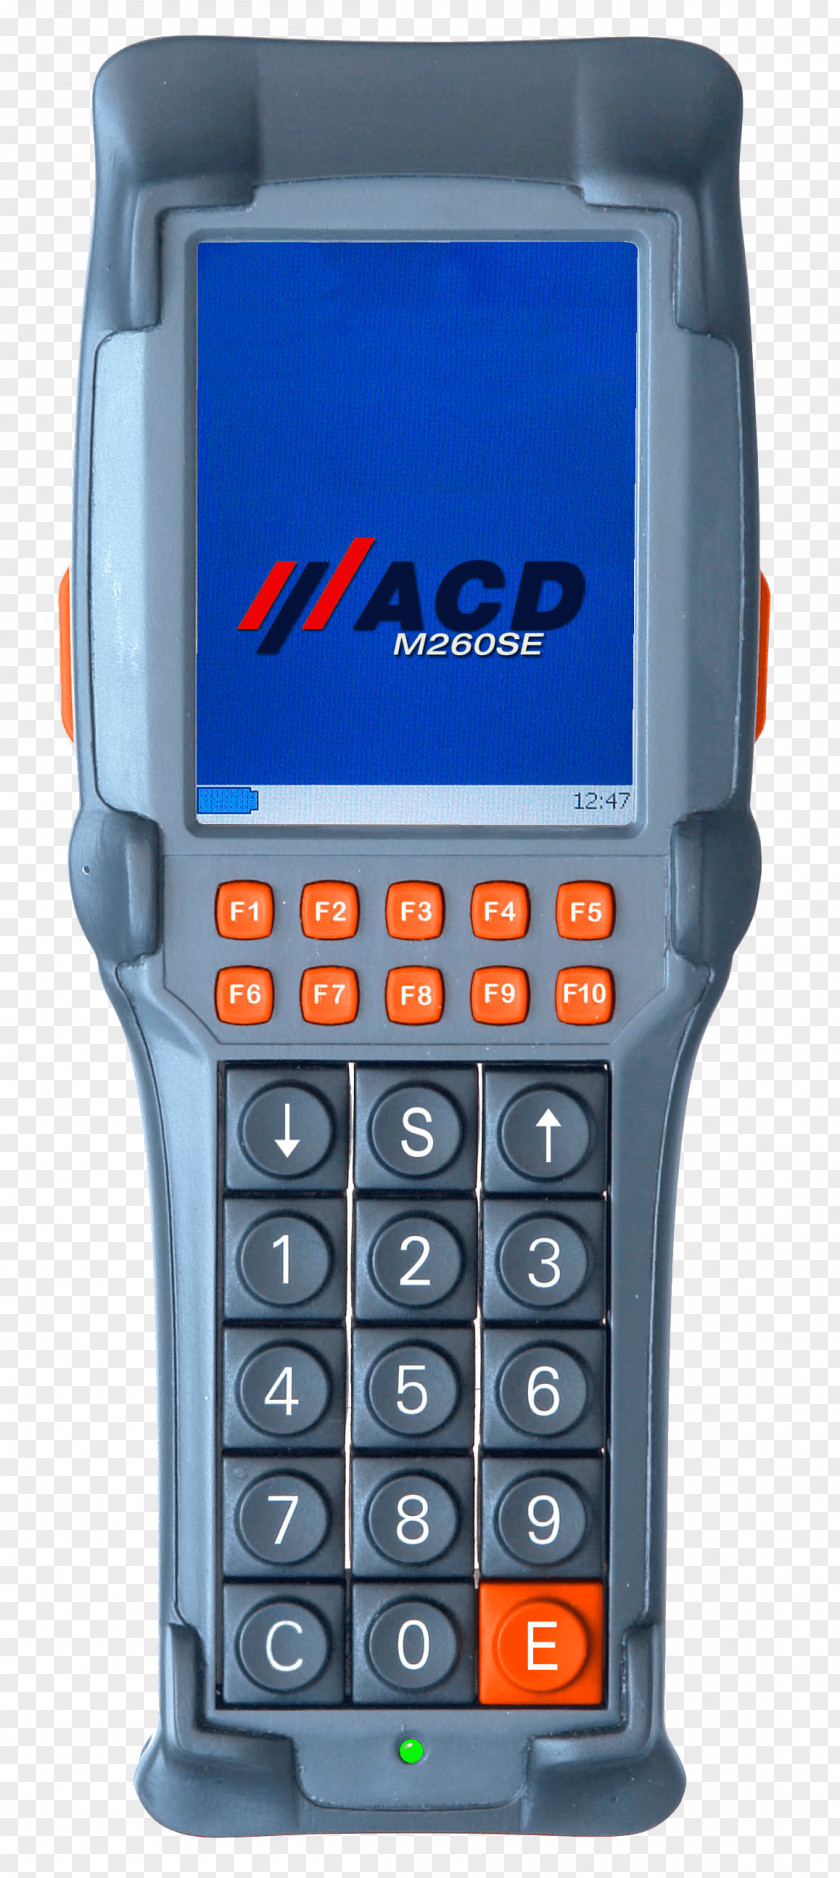 Mobile Terminal Telephony Computer Hardware Handheld Devices Automatic Call Distributor PNG